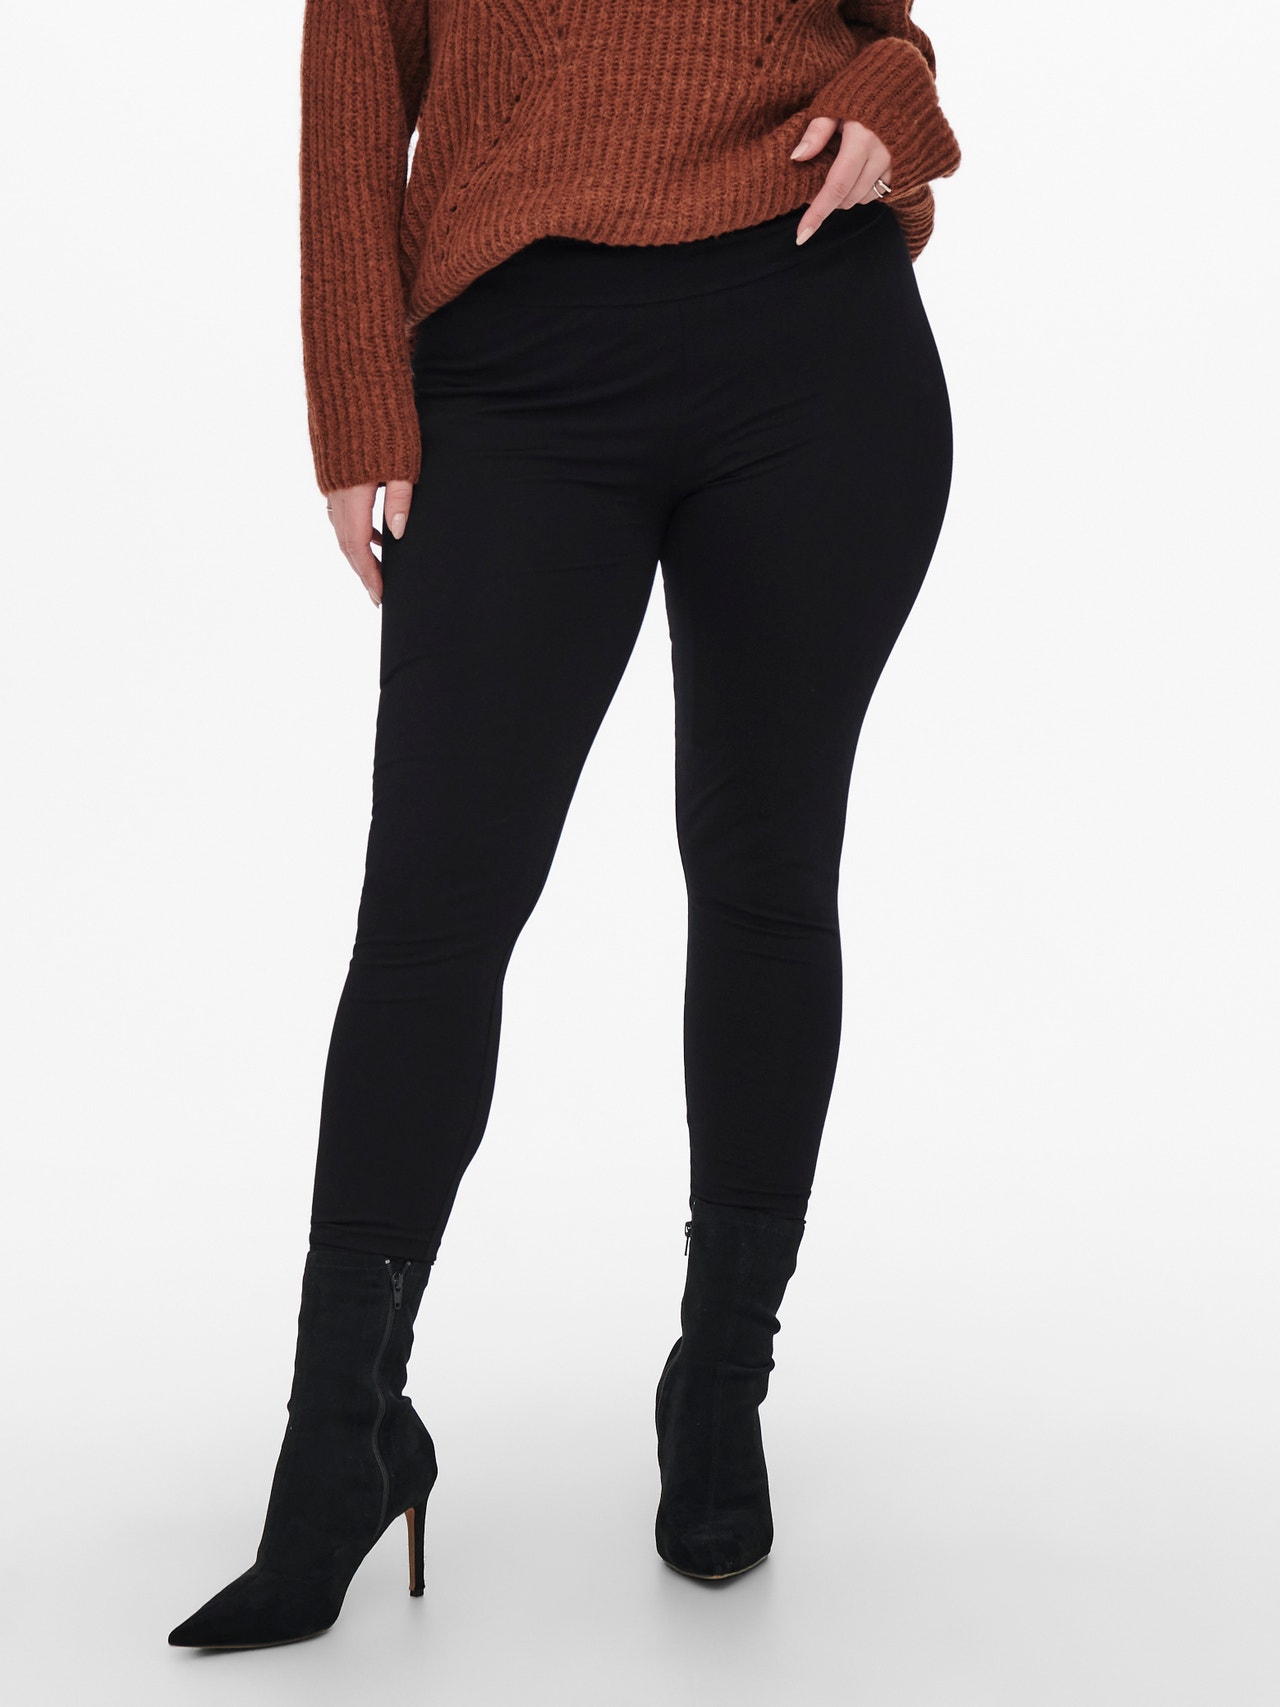 Curvy solid colored Leggings | Black | ONLY®